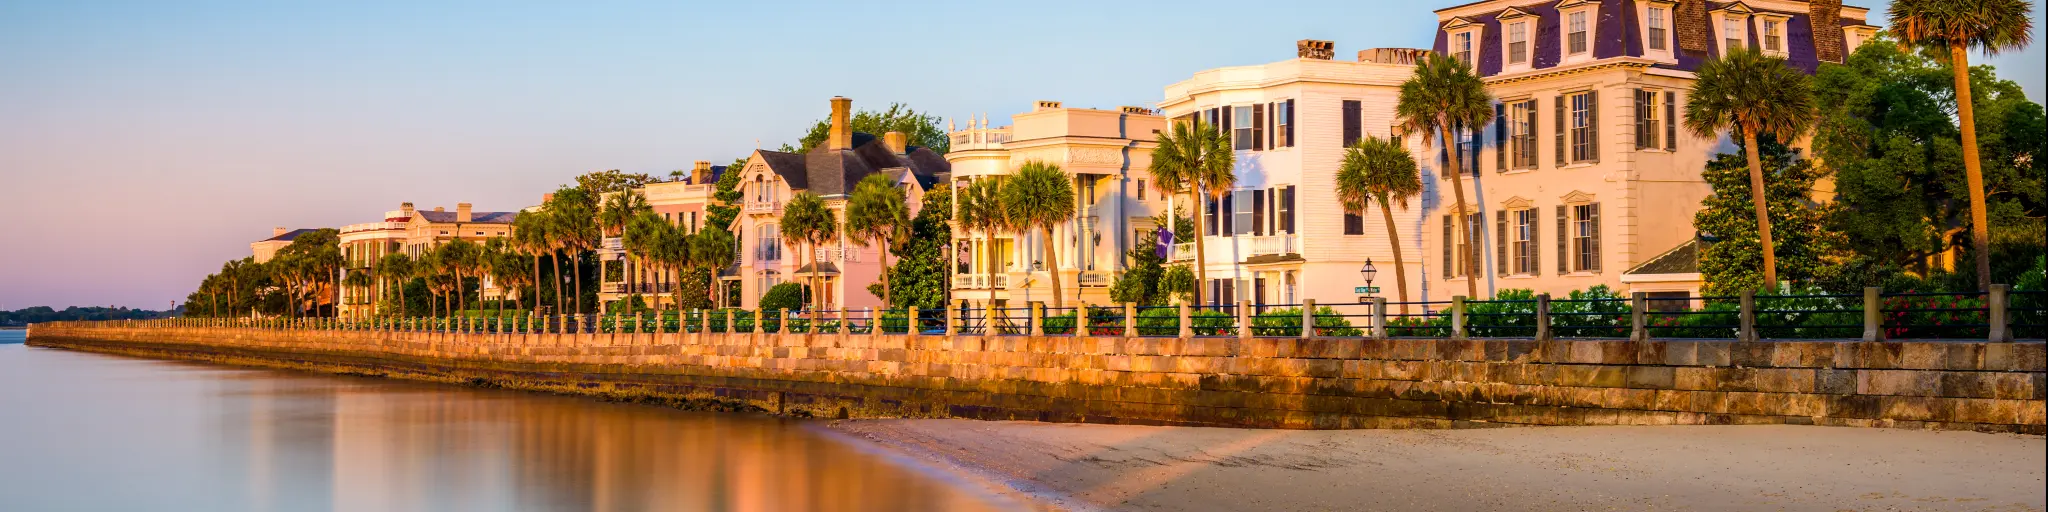 The historic homes near the sea, the Battery in Charleston with beautiful landscape and trees in a clear blue sky morning, South Carolina